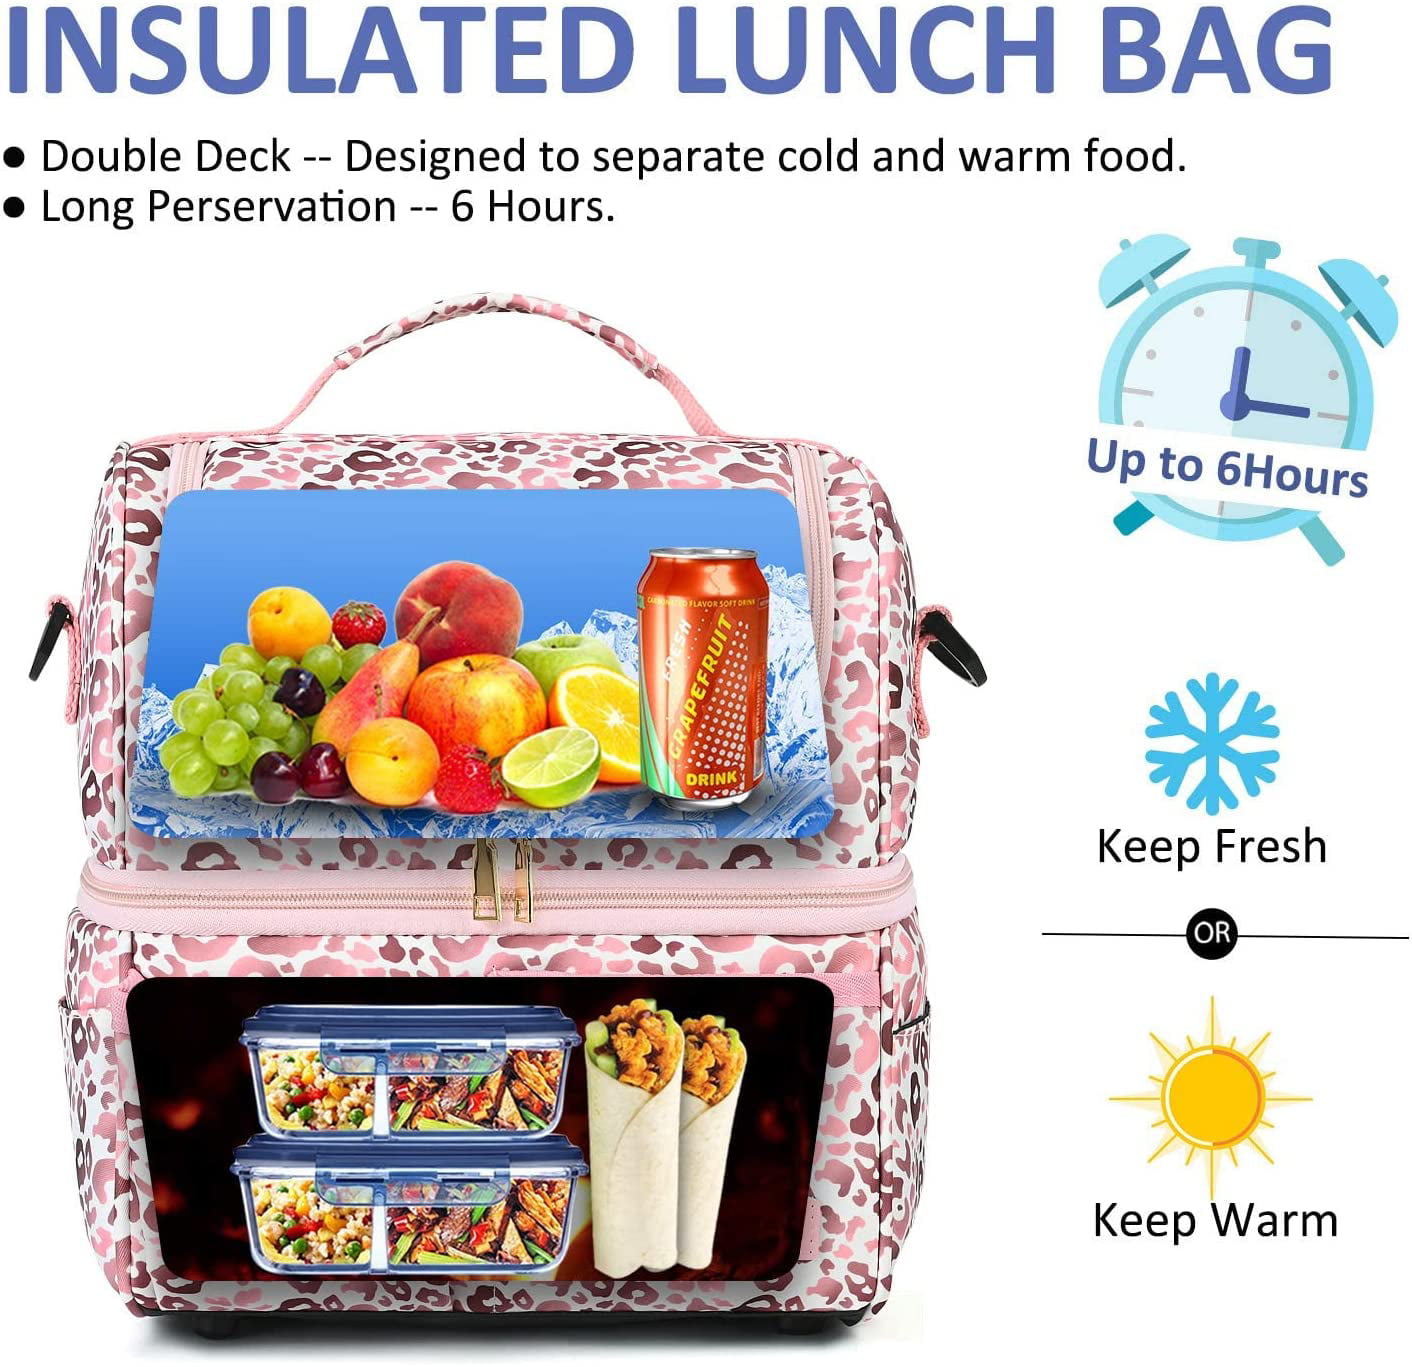 Grey Lokass Lunch Bags for Women Wide Open Insulated Lunch Box With Double Deck Large Capacity Cooler Tote Bag With Removable Shoulder Strap Lunch Organizer For Men/Outdoor/Work 